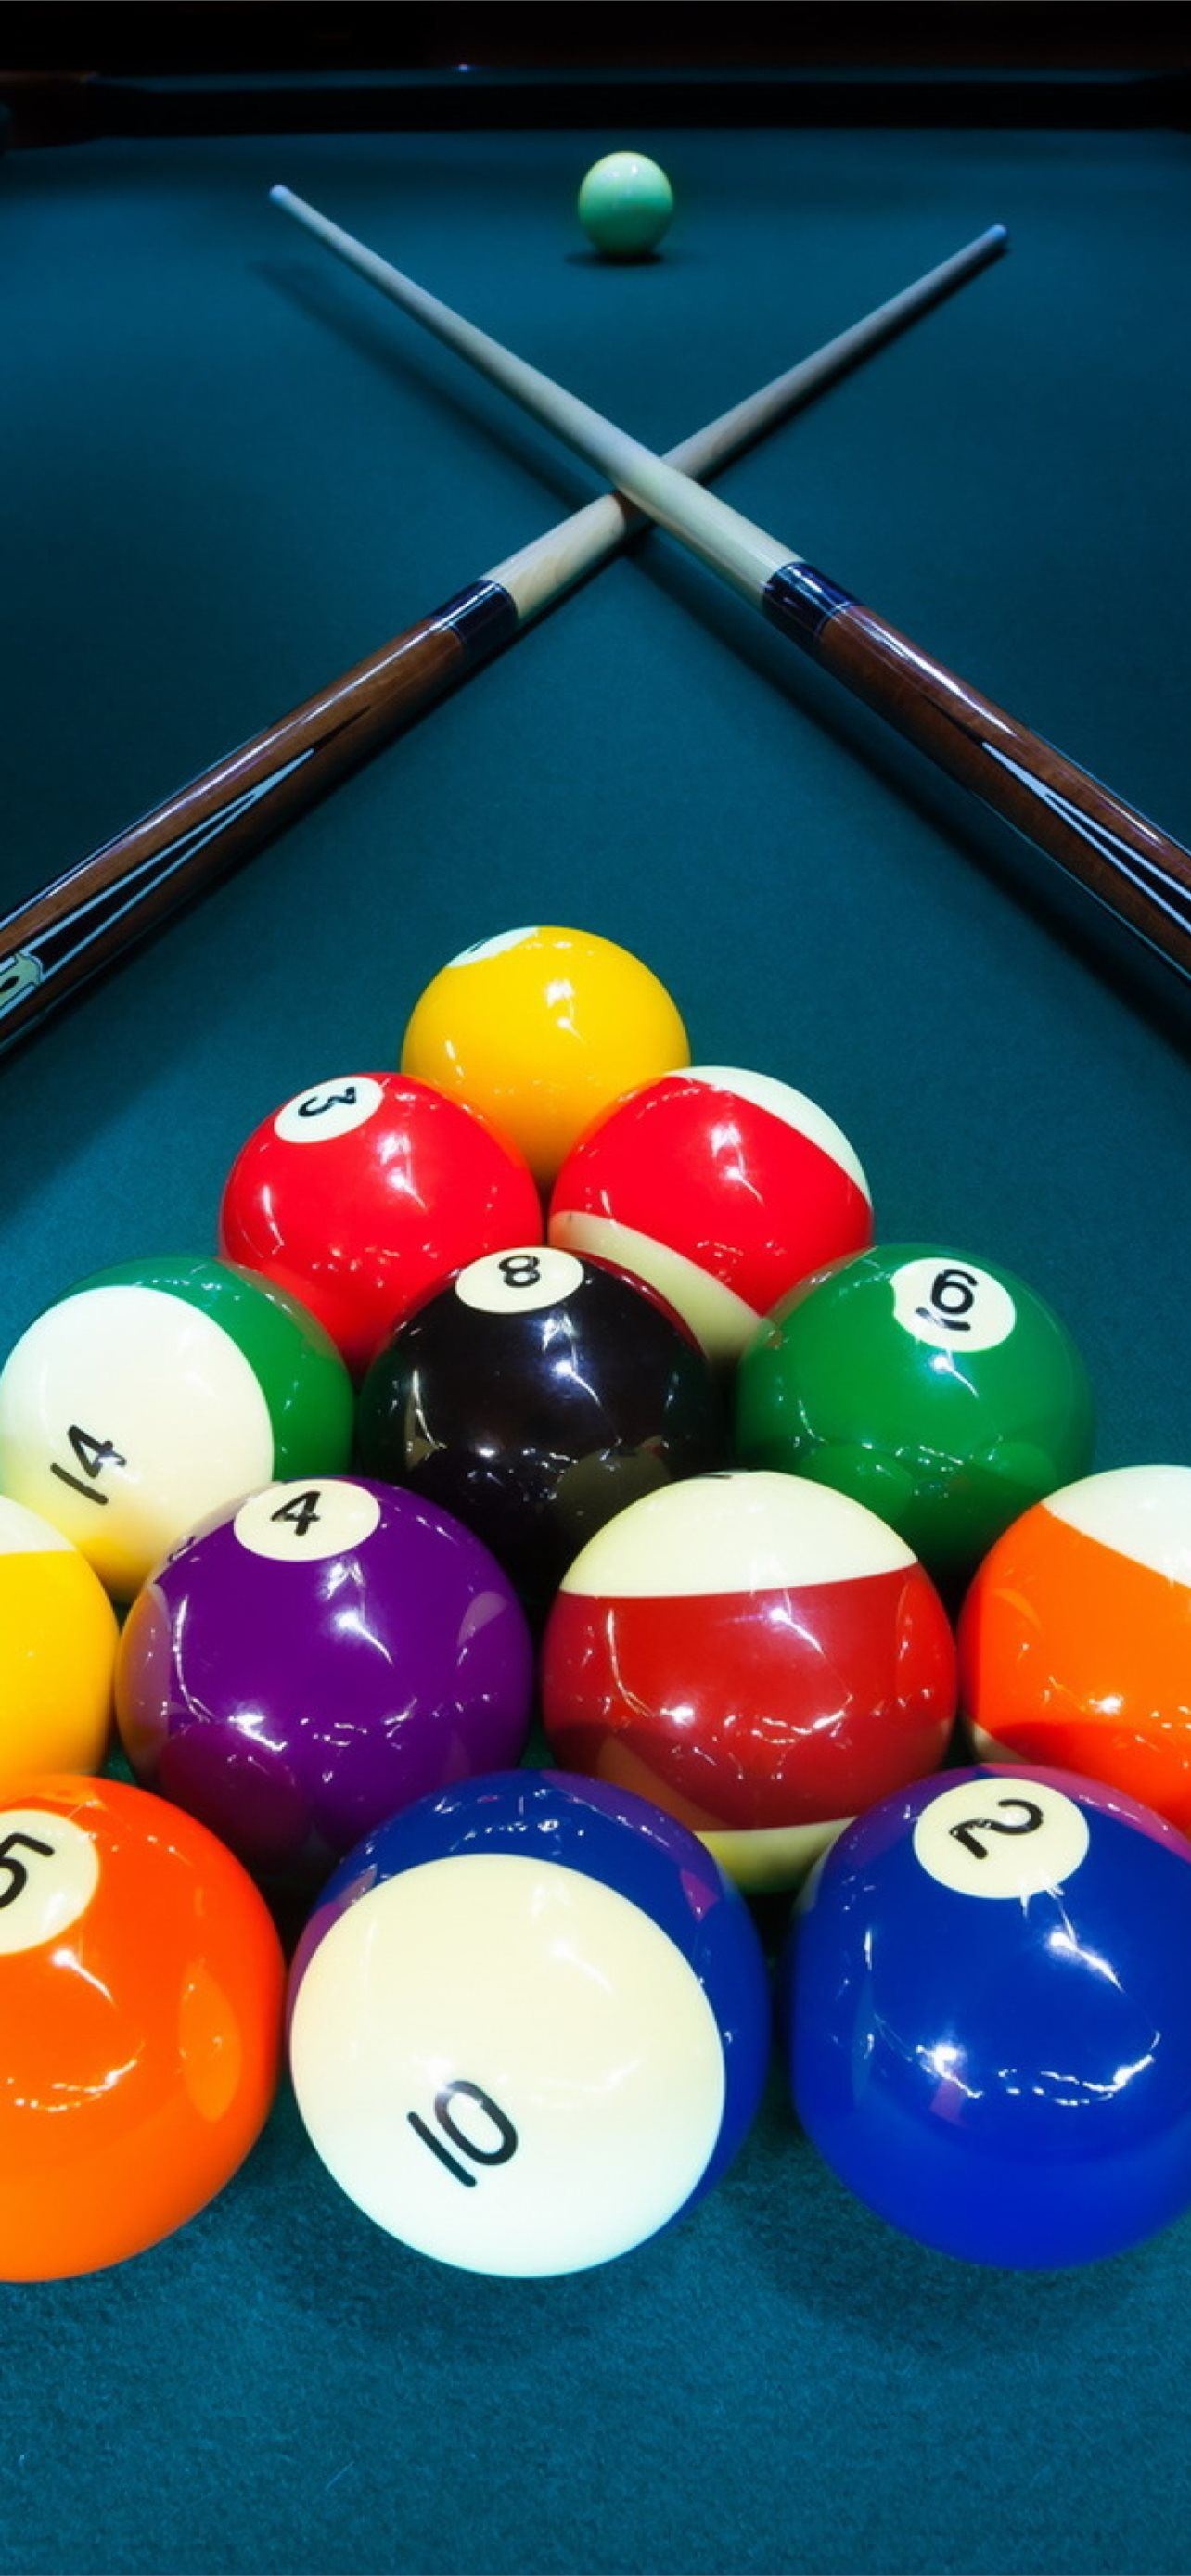 Cue Sports: Classic American eight-ball style of snooker, The most frequently played discipline. 1290x2780 HD Background.